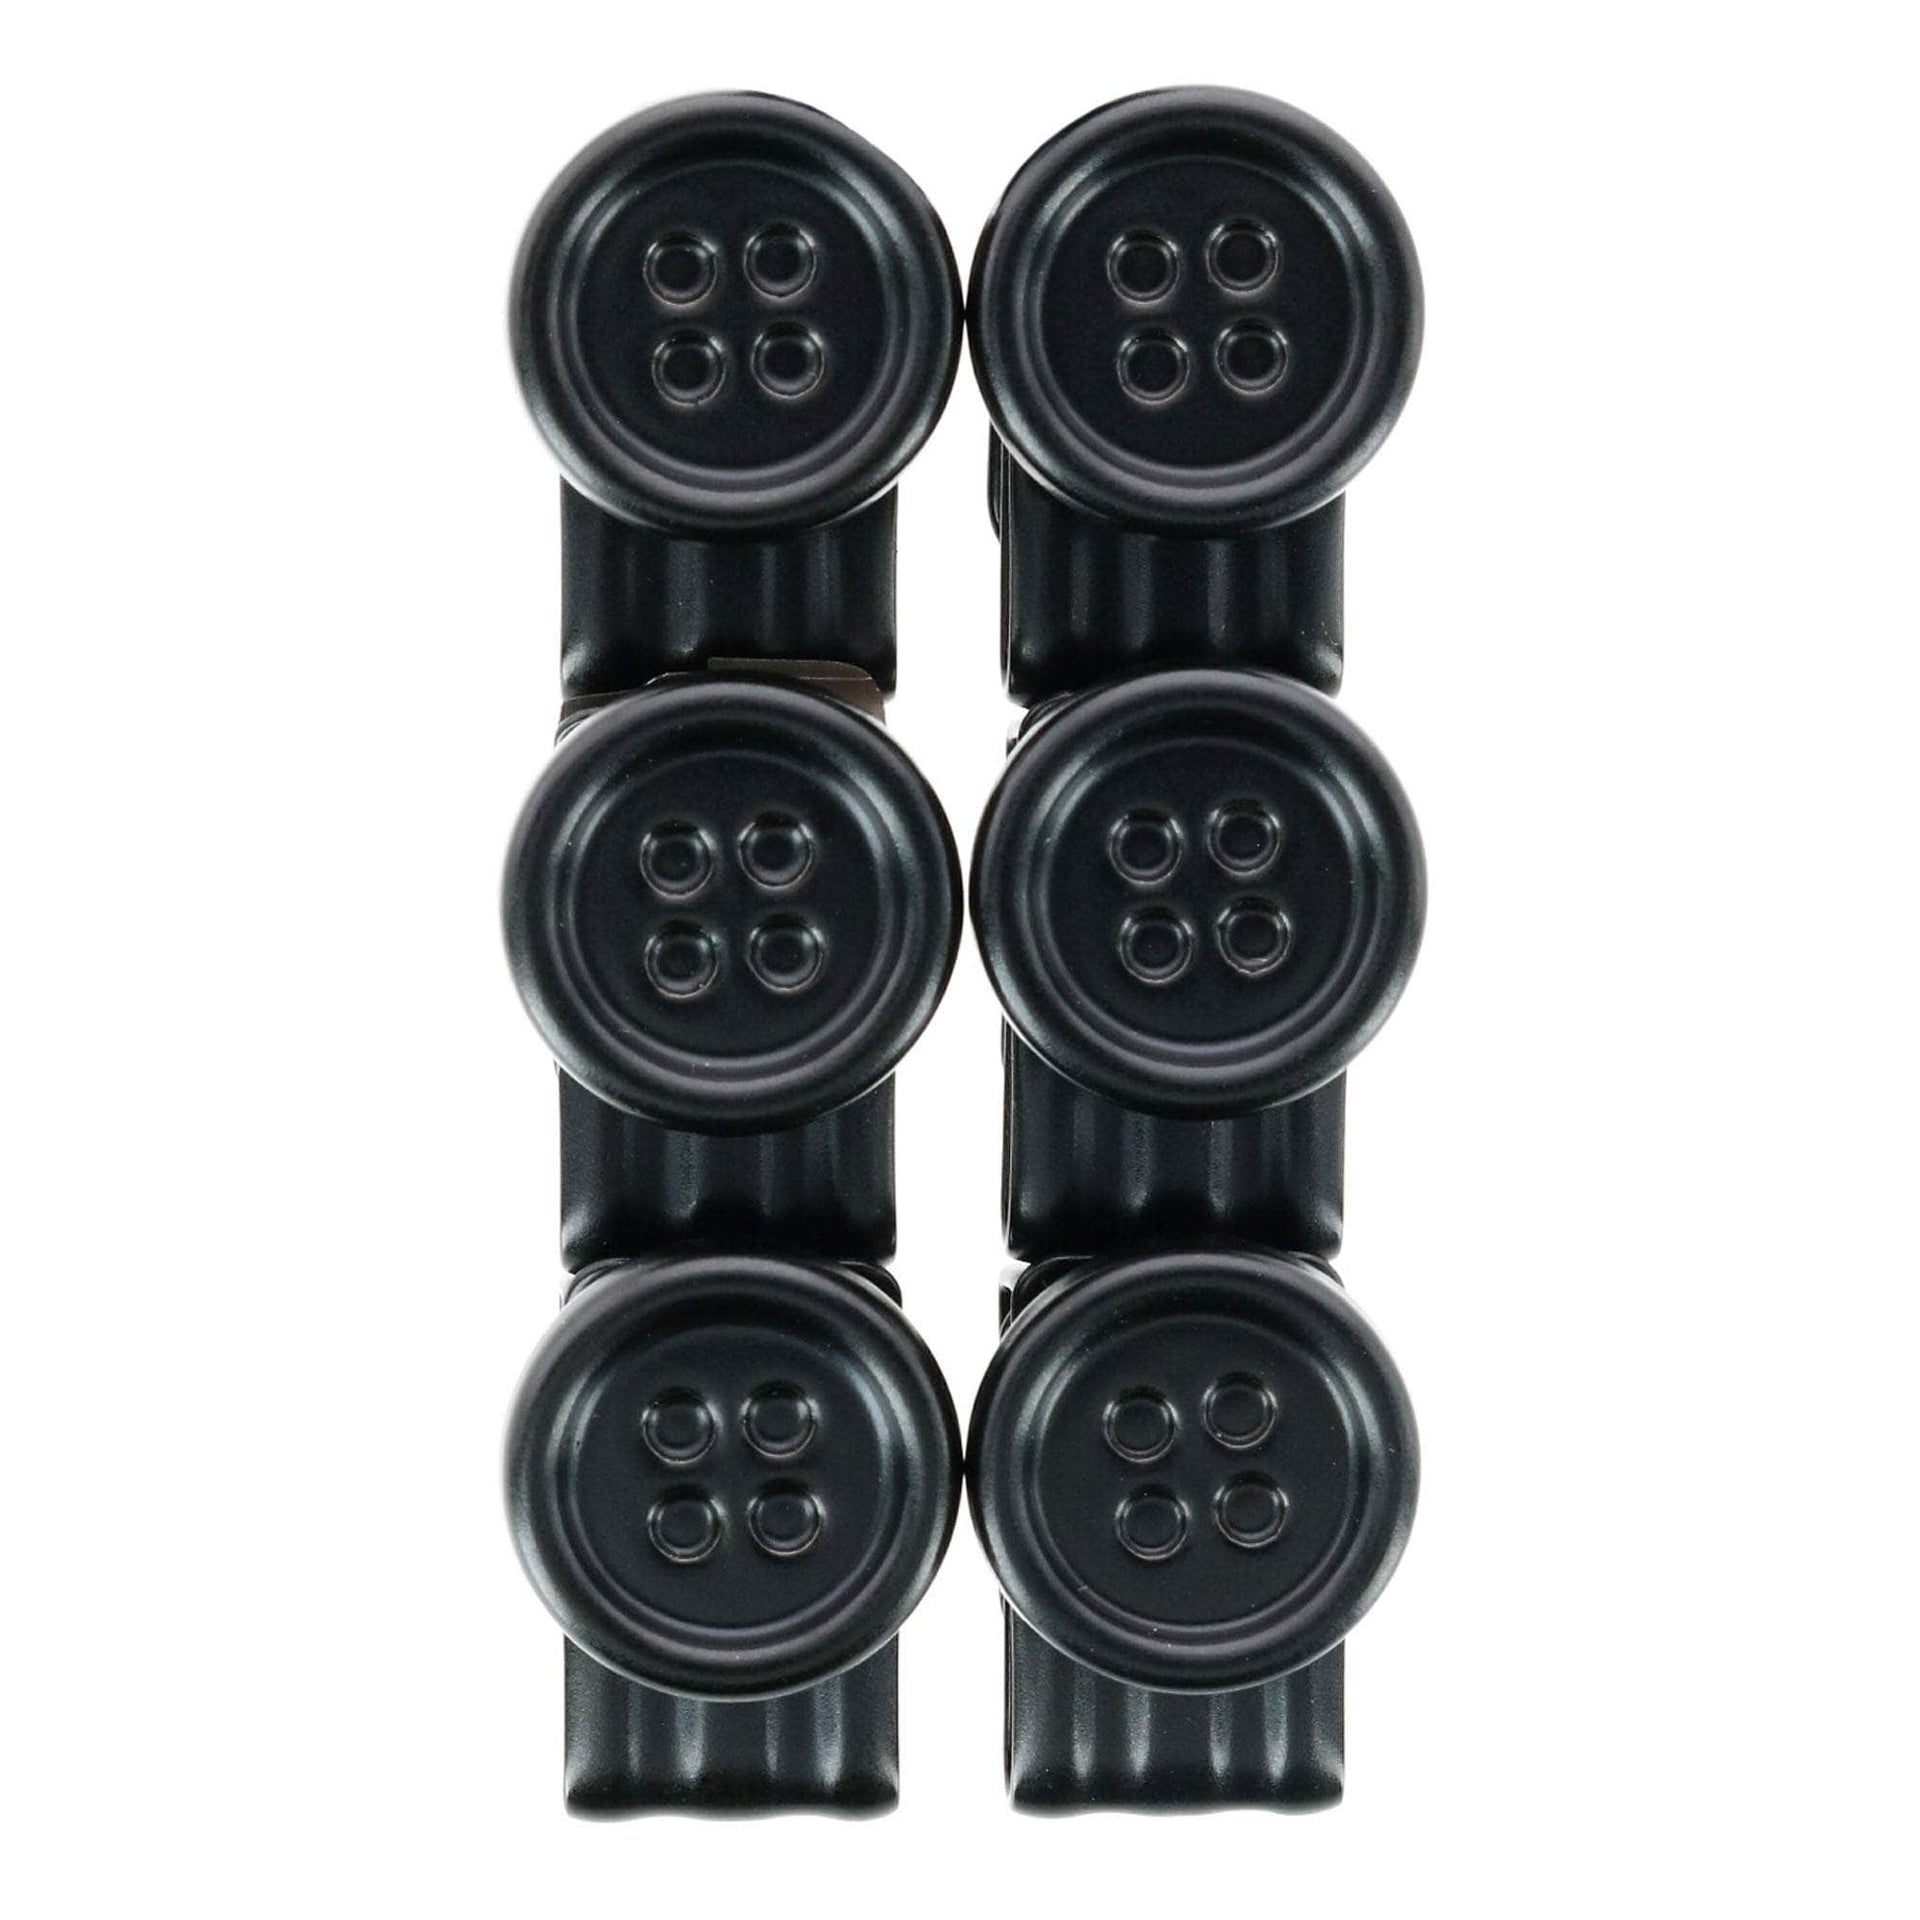 Suspender Store No-Sew EZ-Buttons (movable) - Set of 6 One Size